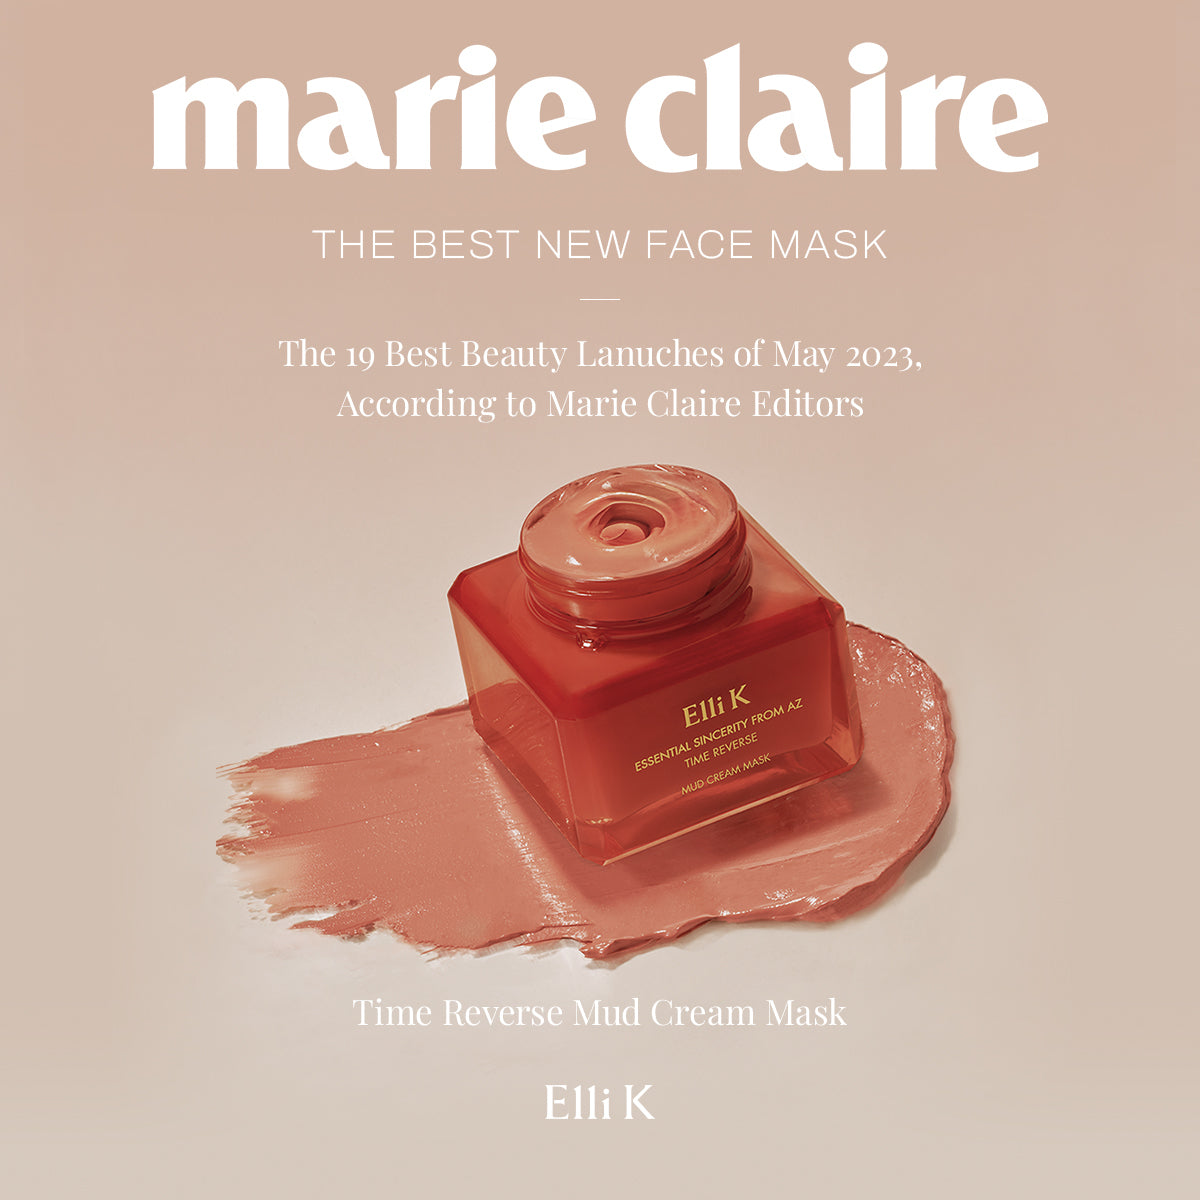 The Best New Face Mask - Elli K Time Reverse Mud Cream Mask